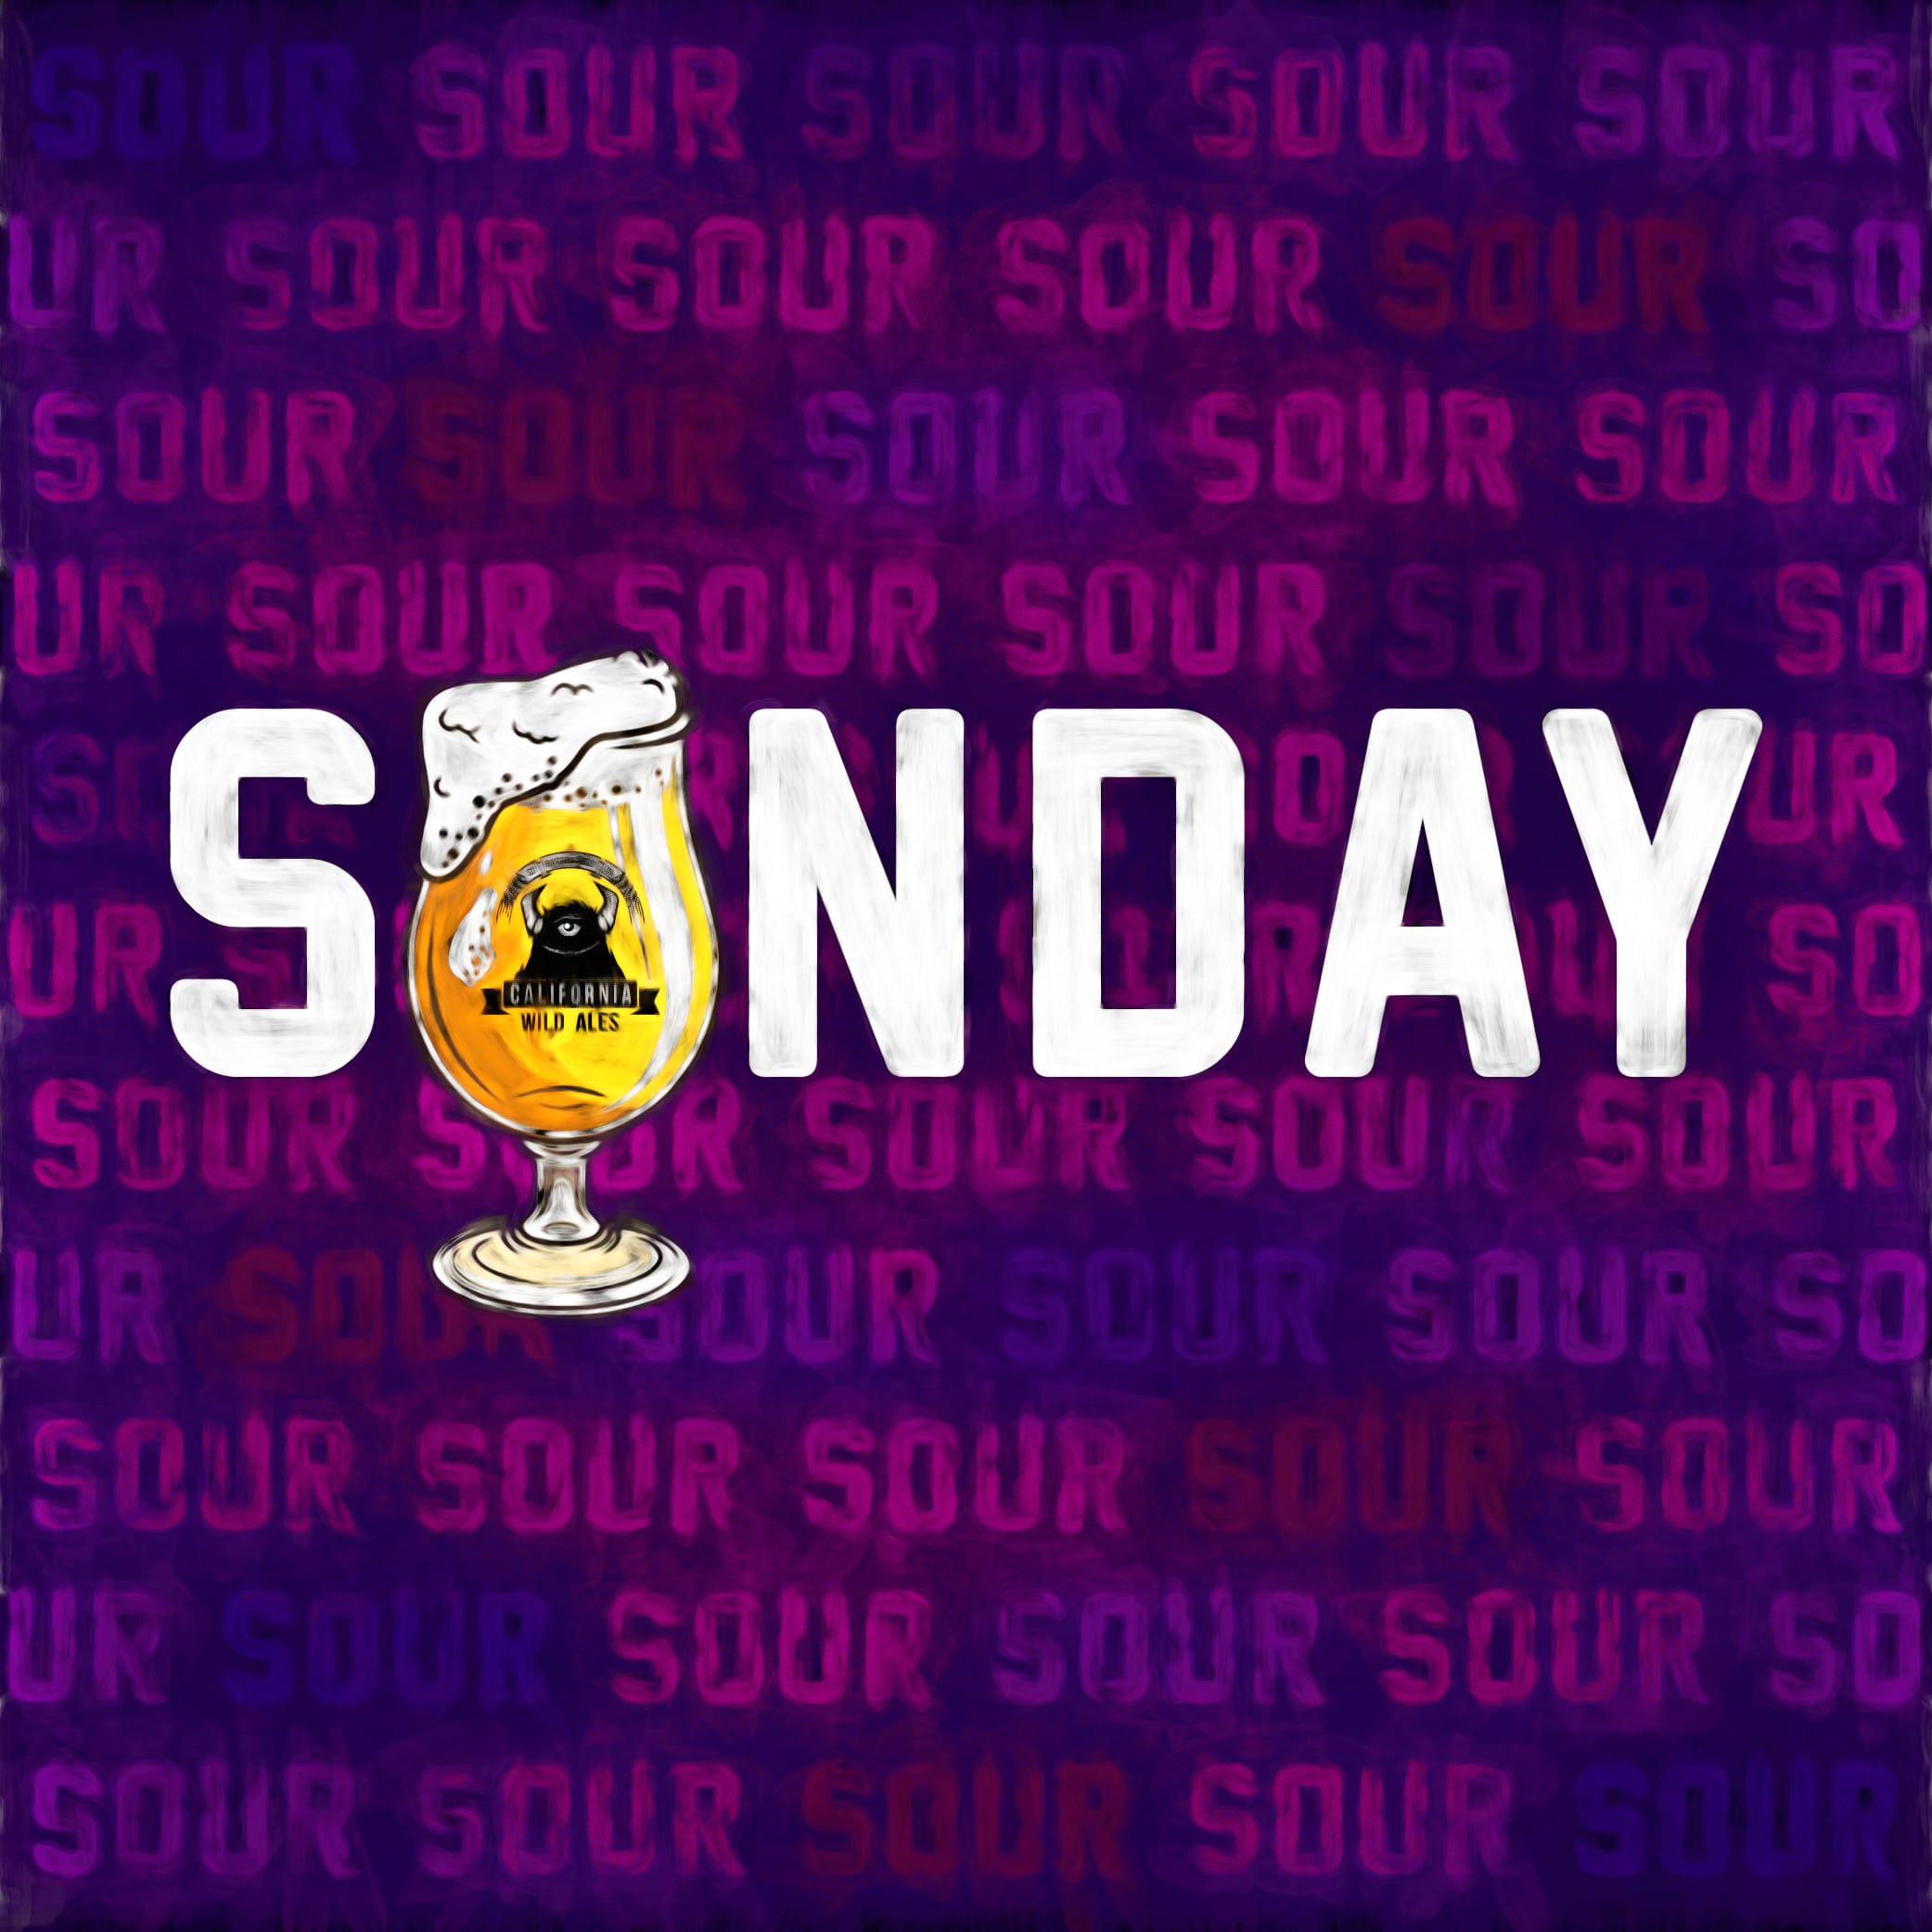 Join us for Sour Sundays!